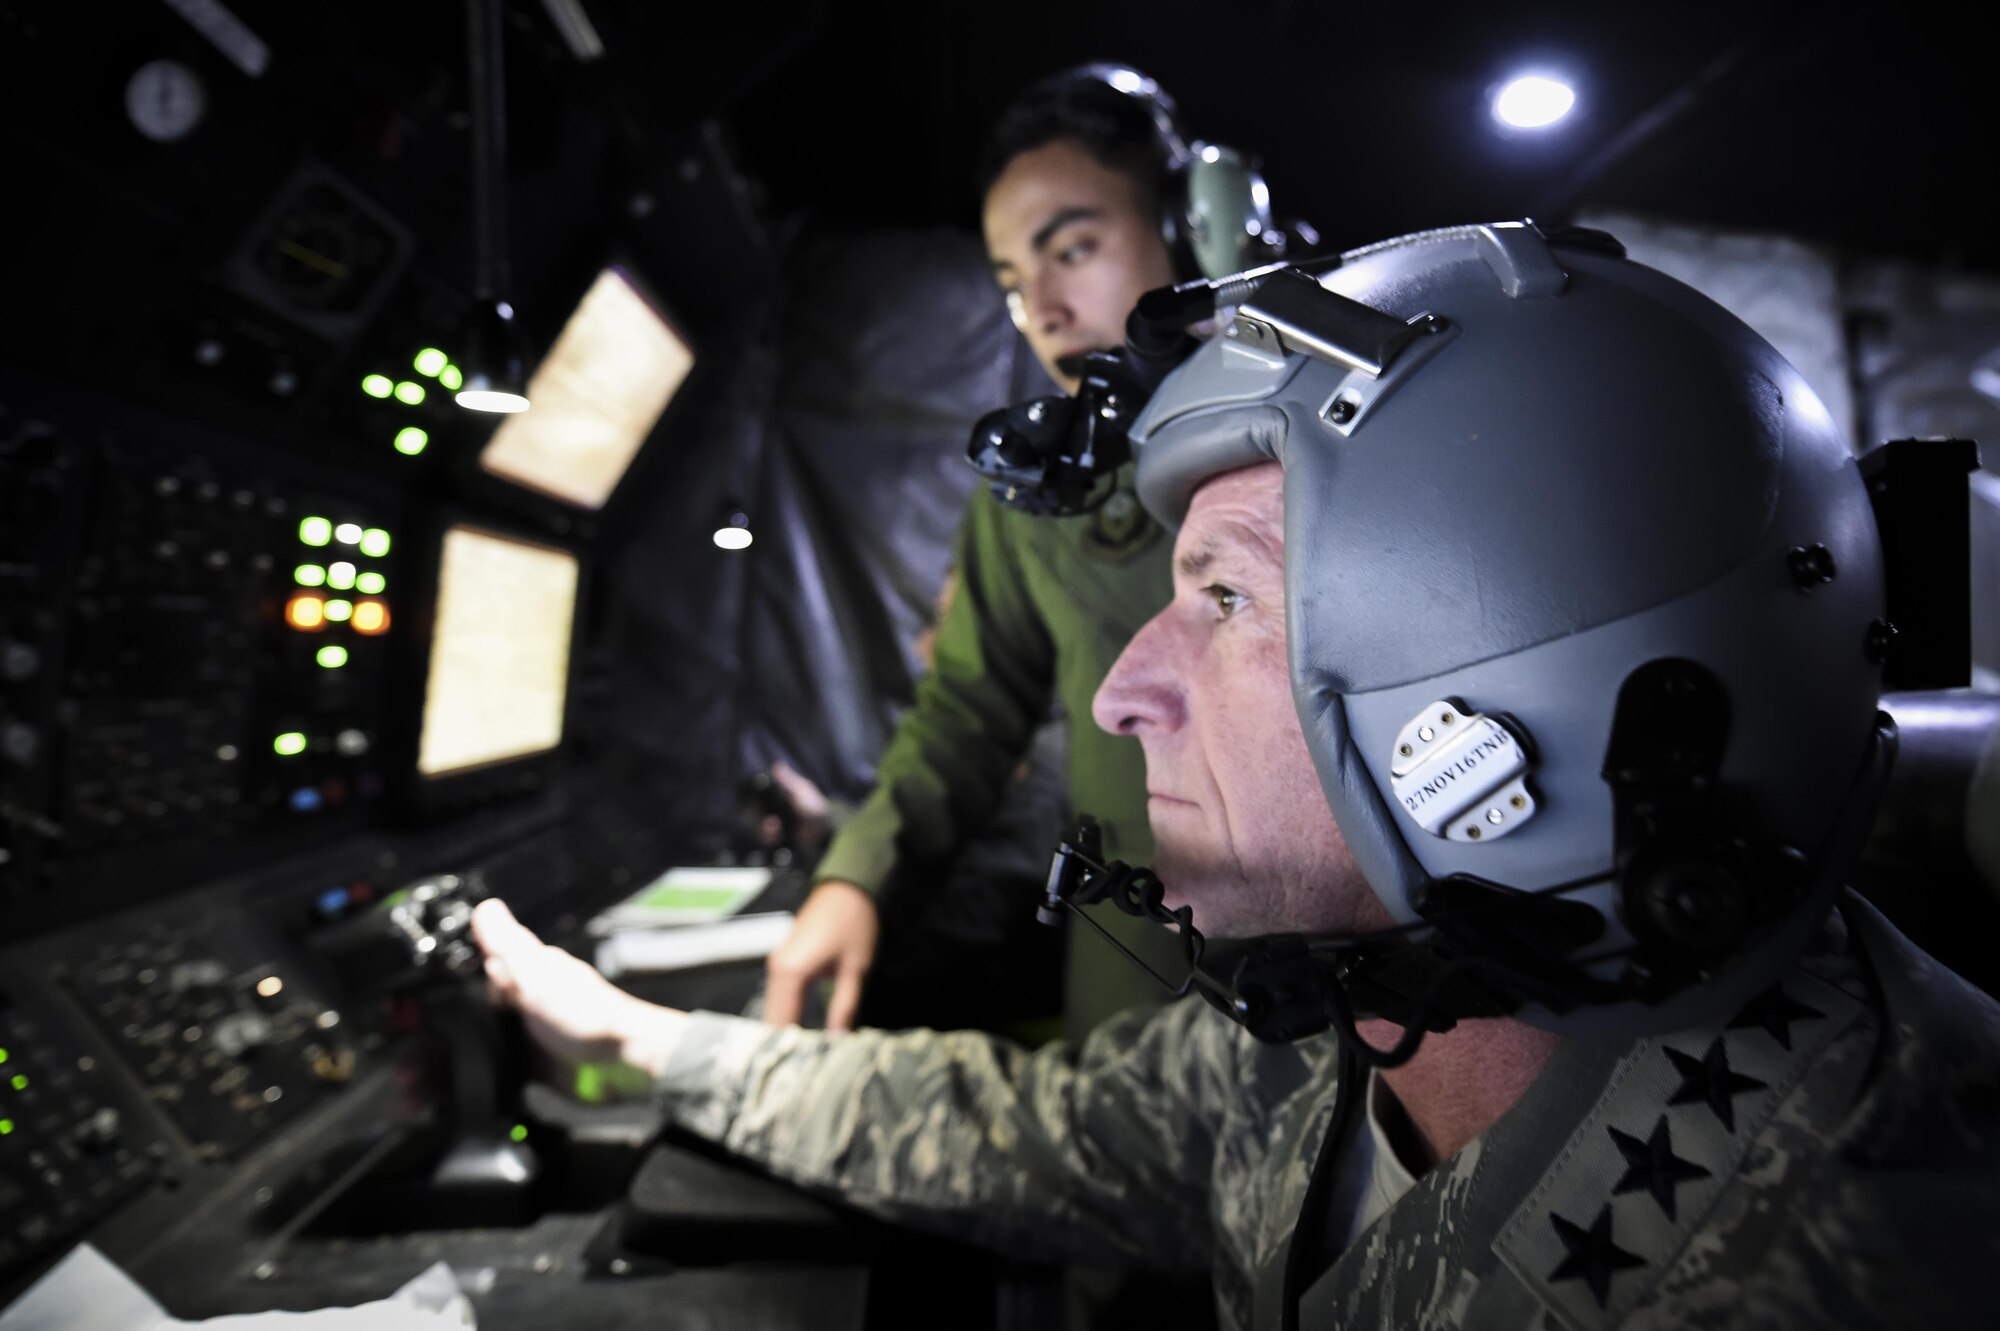 Air Force Chief of Staff Gen. David L. Goldfein operates AC-130U Spooky gunship equipment during a Spooky mission orientation flight at Hurlburt Field, Fla., Oct. 19, 2016. Goldfein was the keynote speaker at the Special Tactics Memorial dedication ceremony at the Hurlburt Field Air Park. During their visit, Goldfein and his wife, Dawn, met with AFSOC, 505th Command and Control Wing, and base leadership and personnel.  (U.S. Air Force photo by Senior Airman Jeff Parkinson)